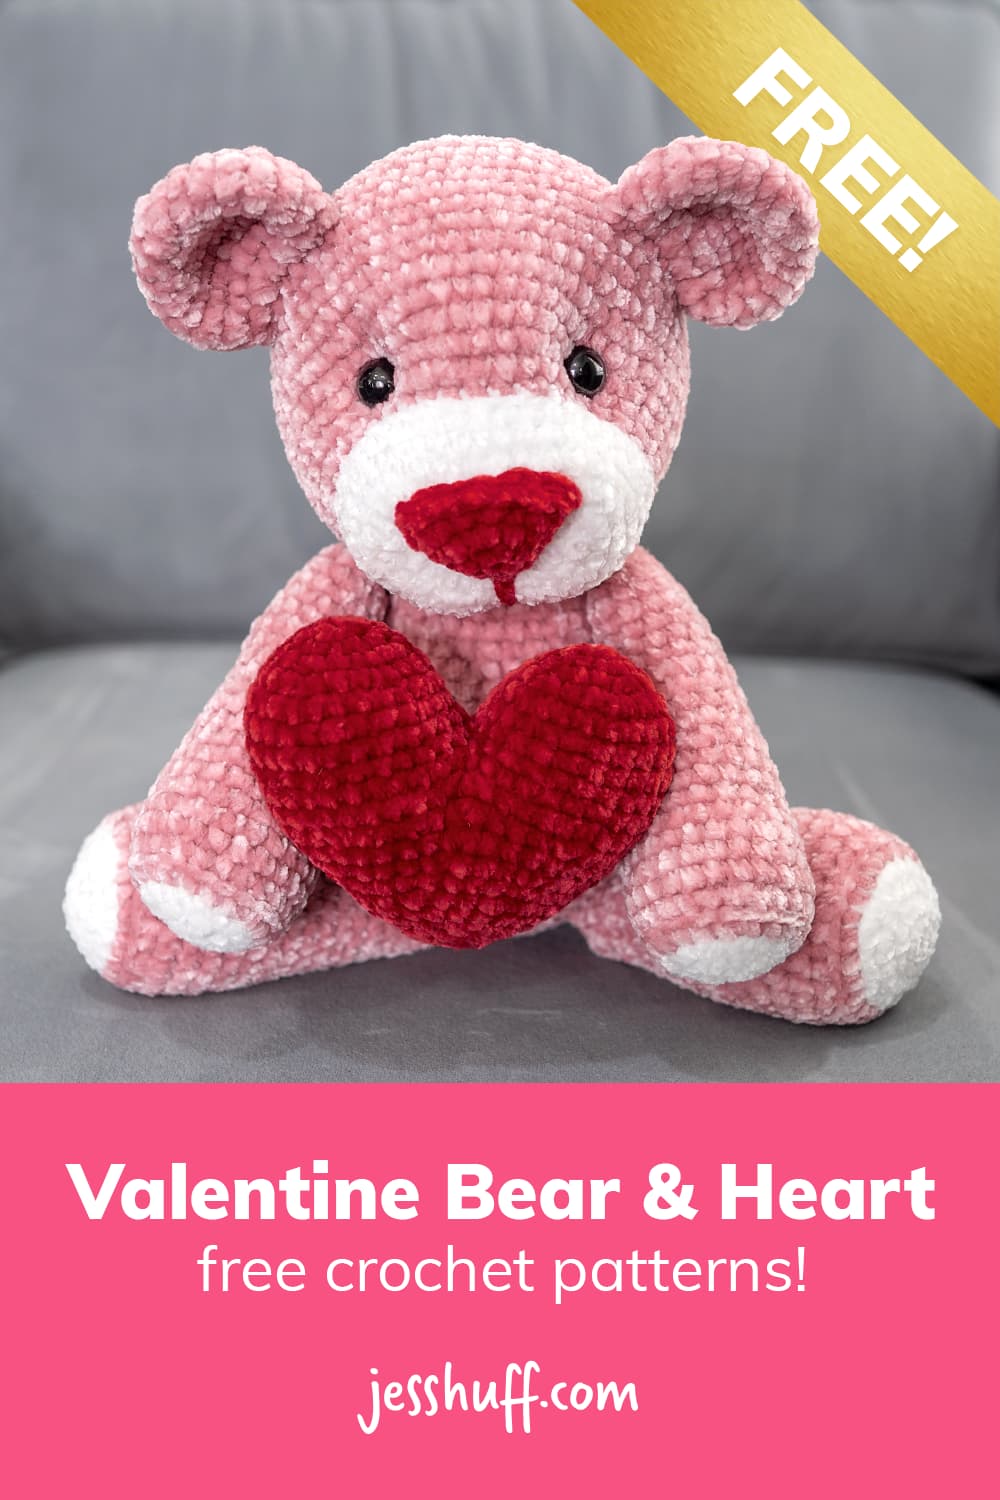 Roses are red, violets are blue. Crochet your valentine a cuddly bear to say, "I love you!" via @heyjesshuff